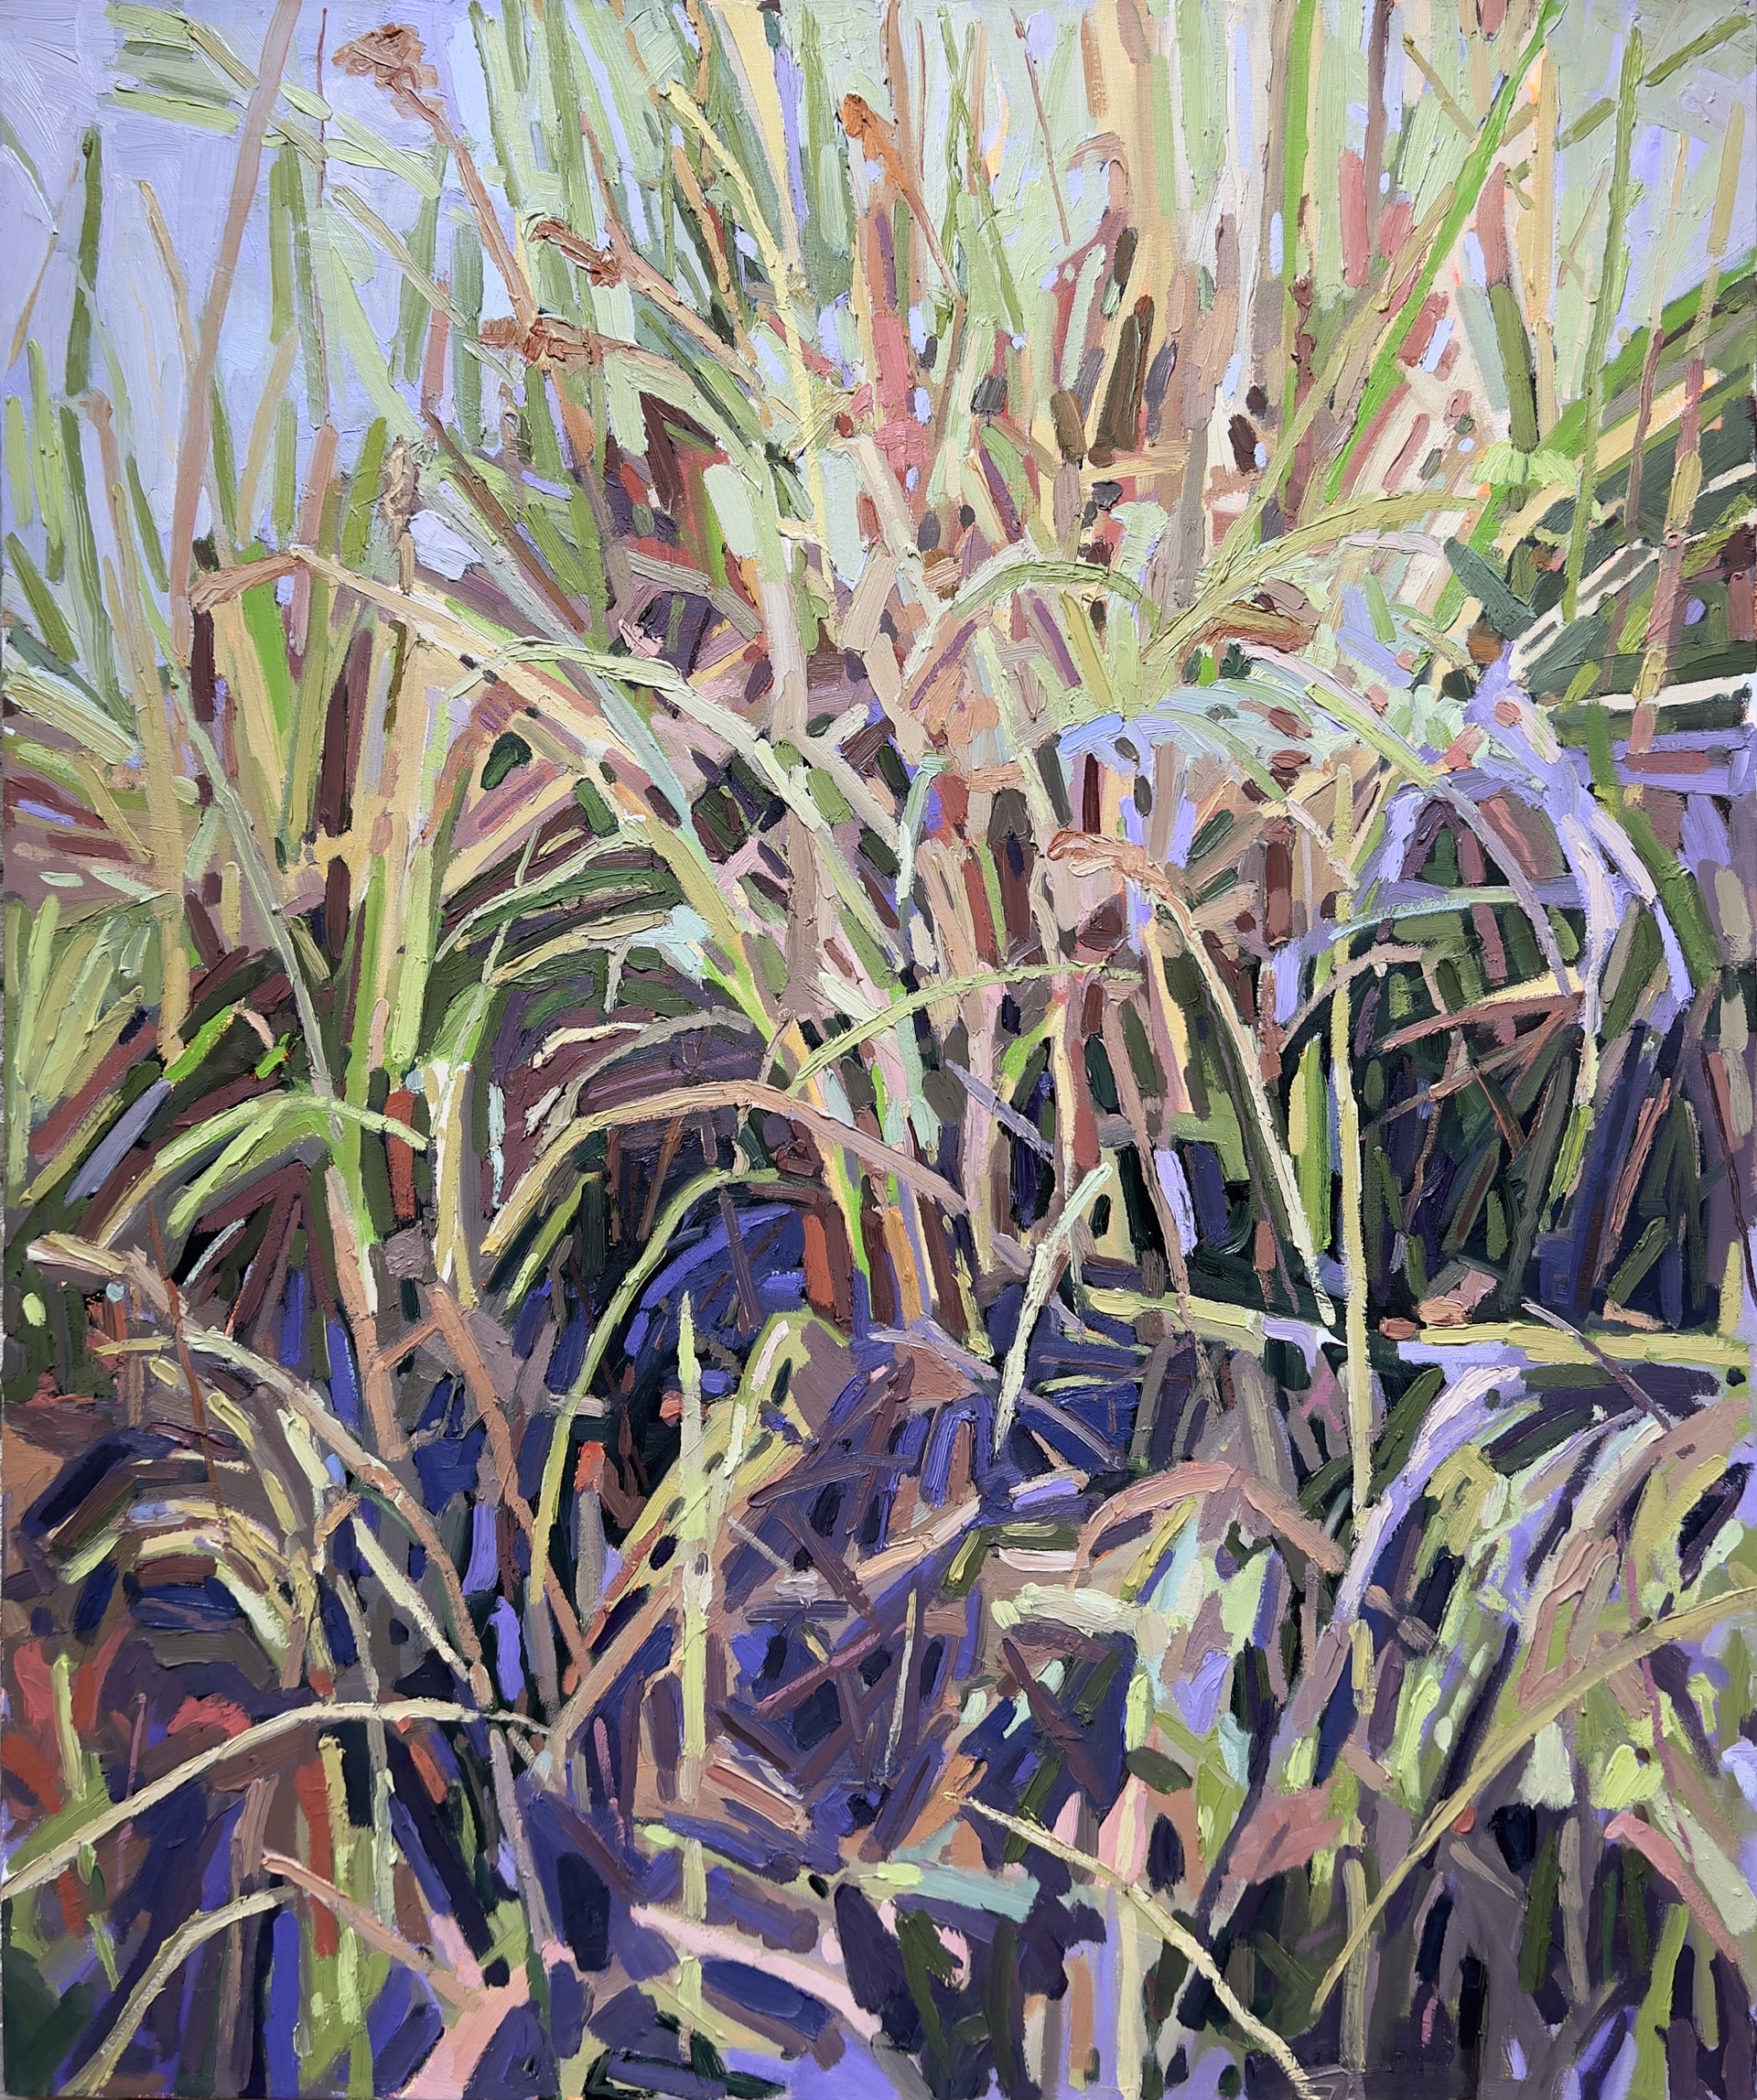 Grasses by Krista Townsend